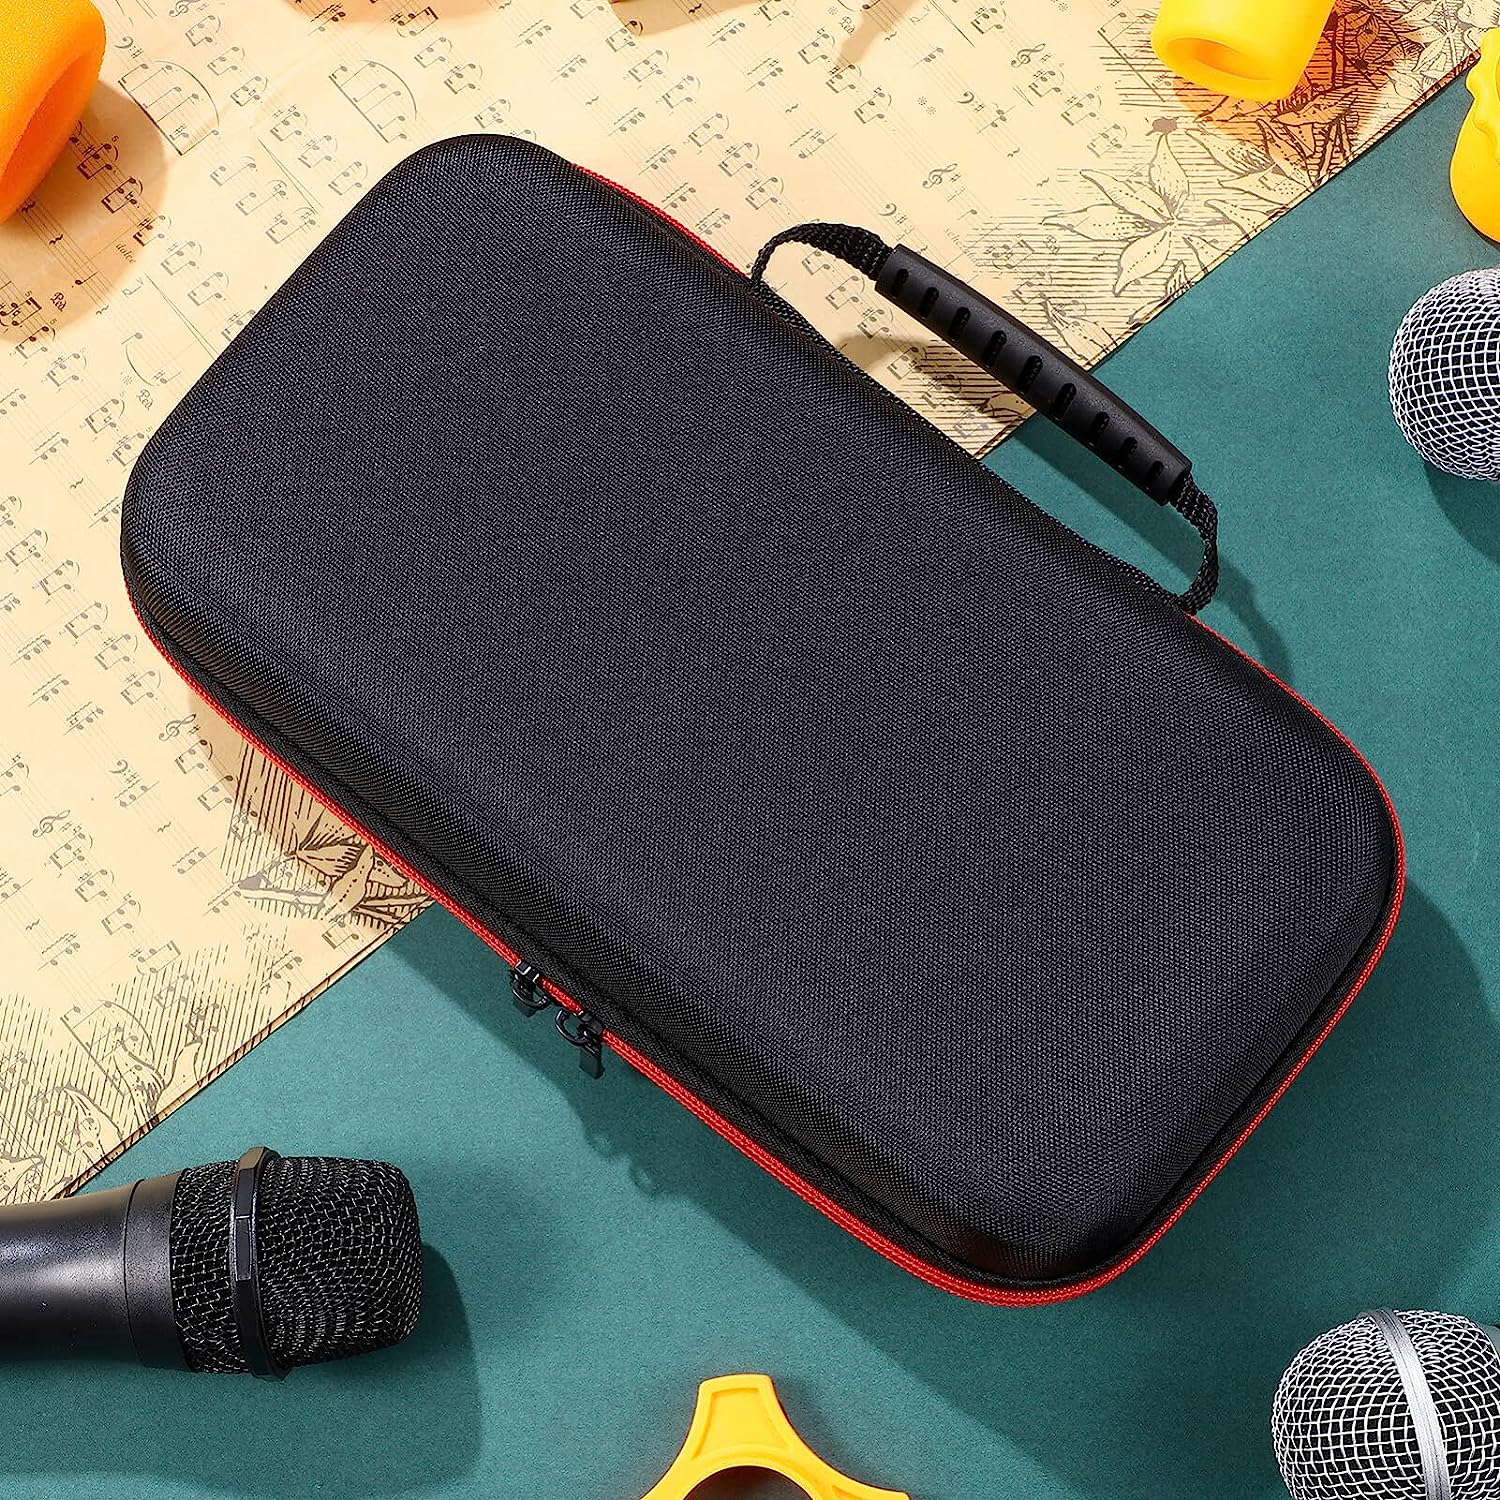 Ciieeo Wireless Microphone Case Mic Storage Bag for 2 Handheld Microphones Hard EVA Case with Zipper for Travel Outdoor